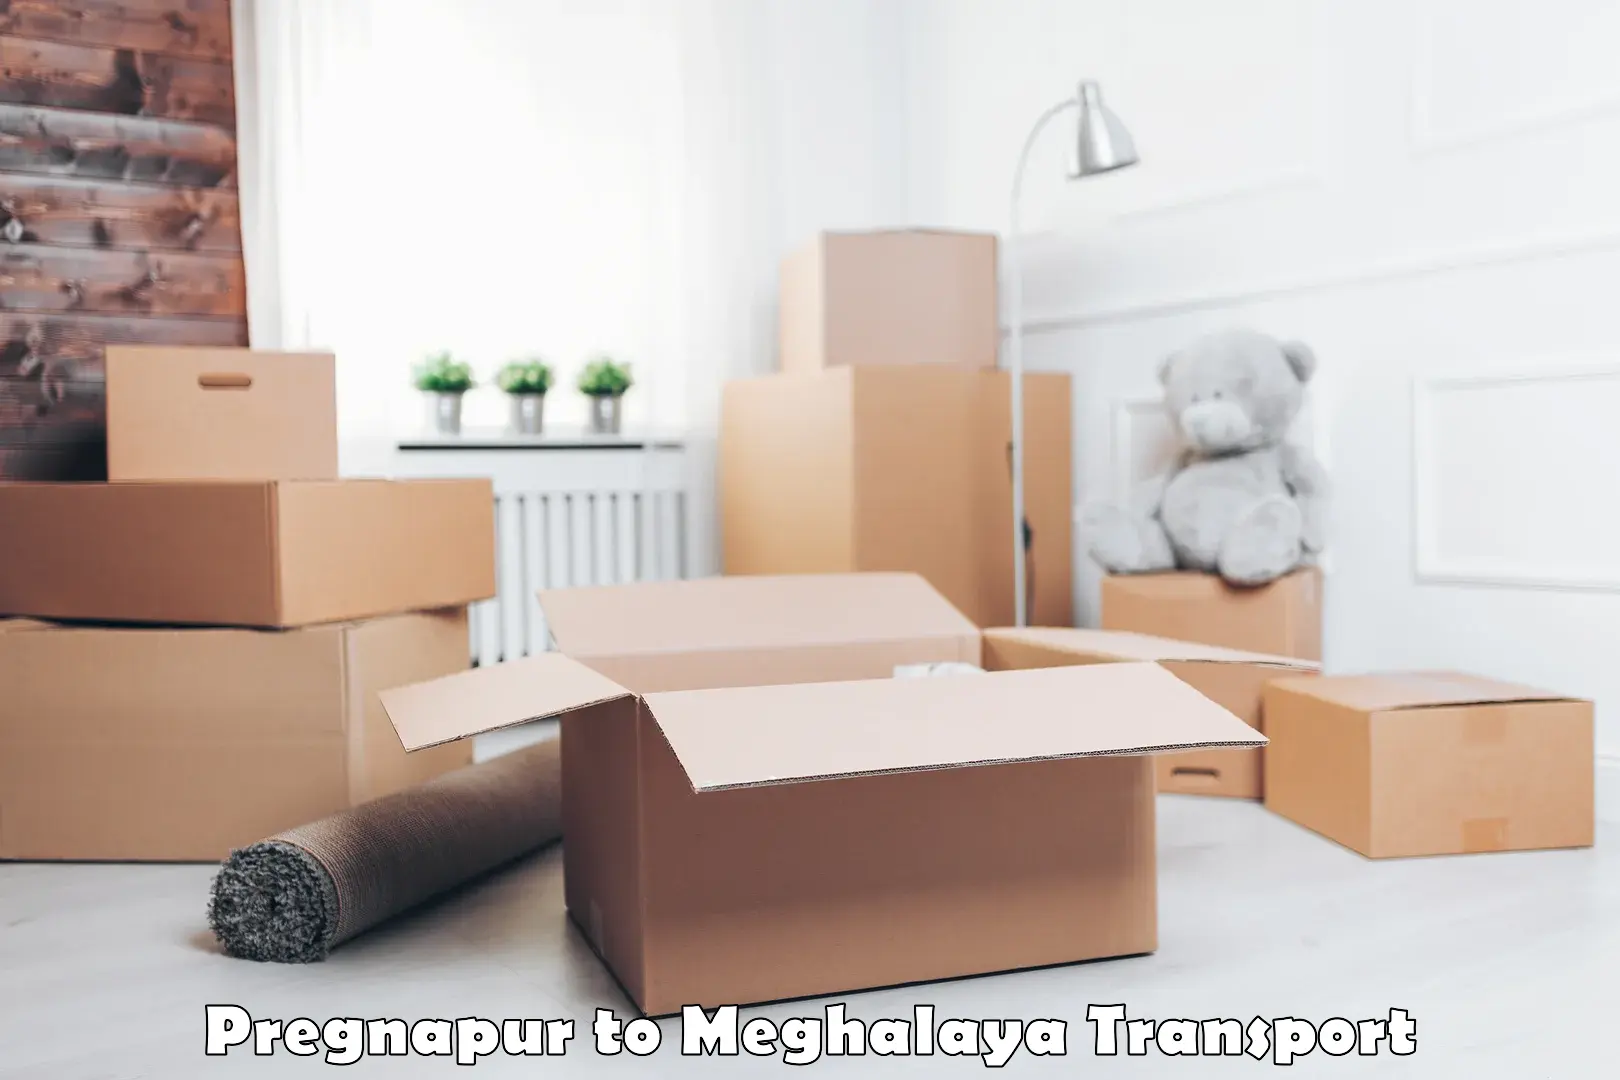 Transport shared services Pregnapur to Meghalaya